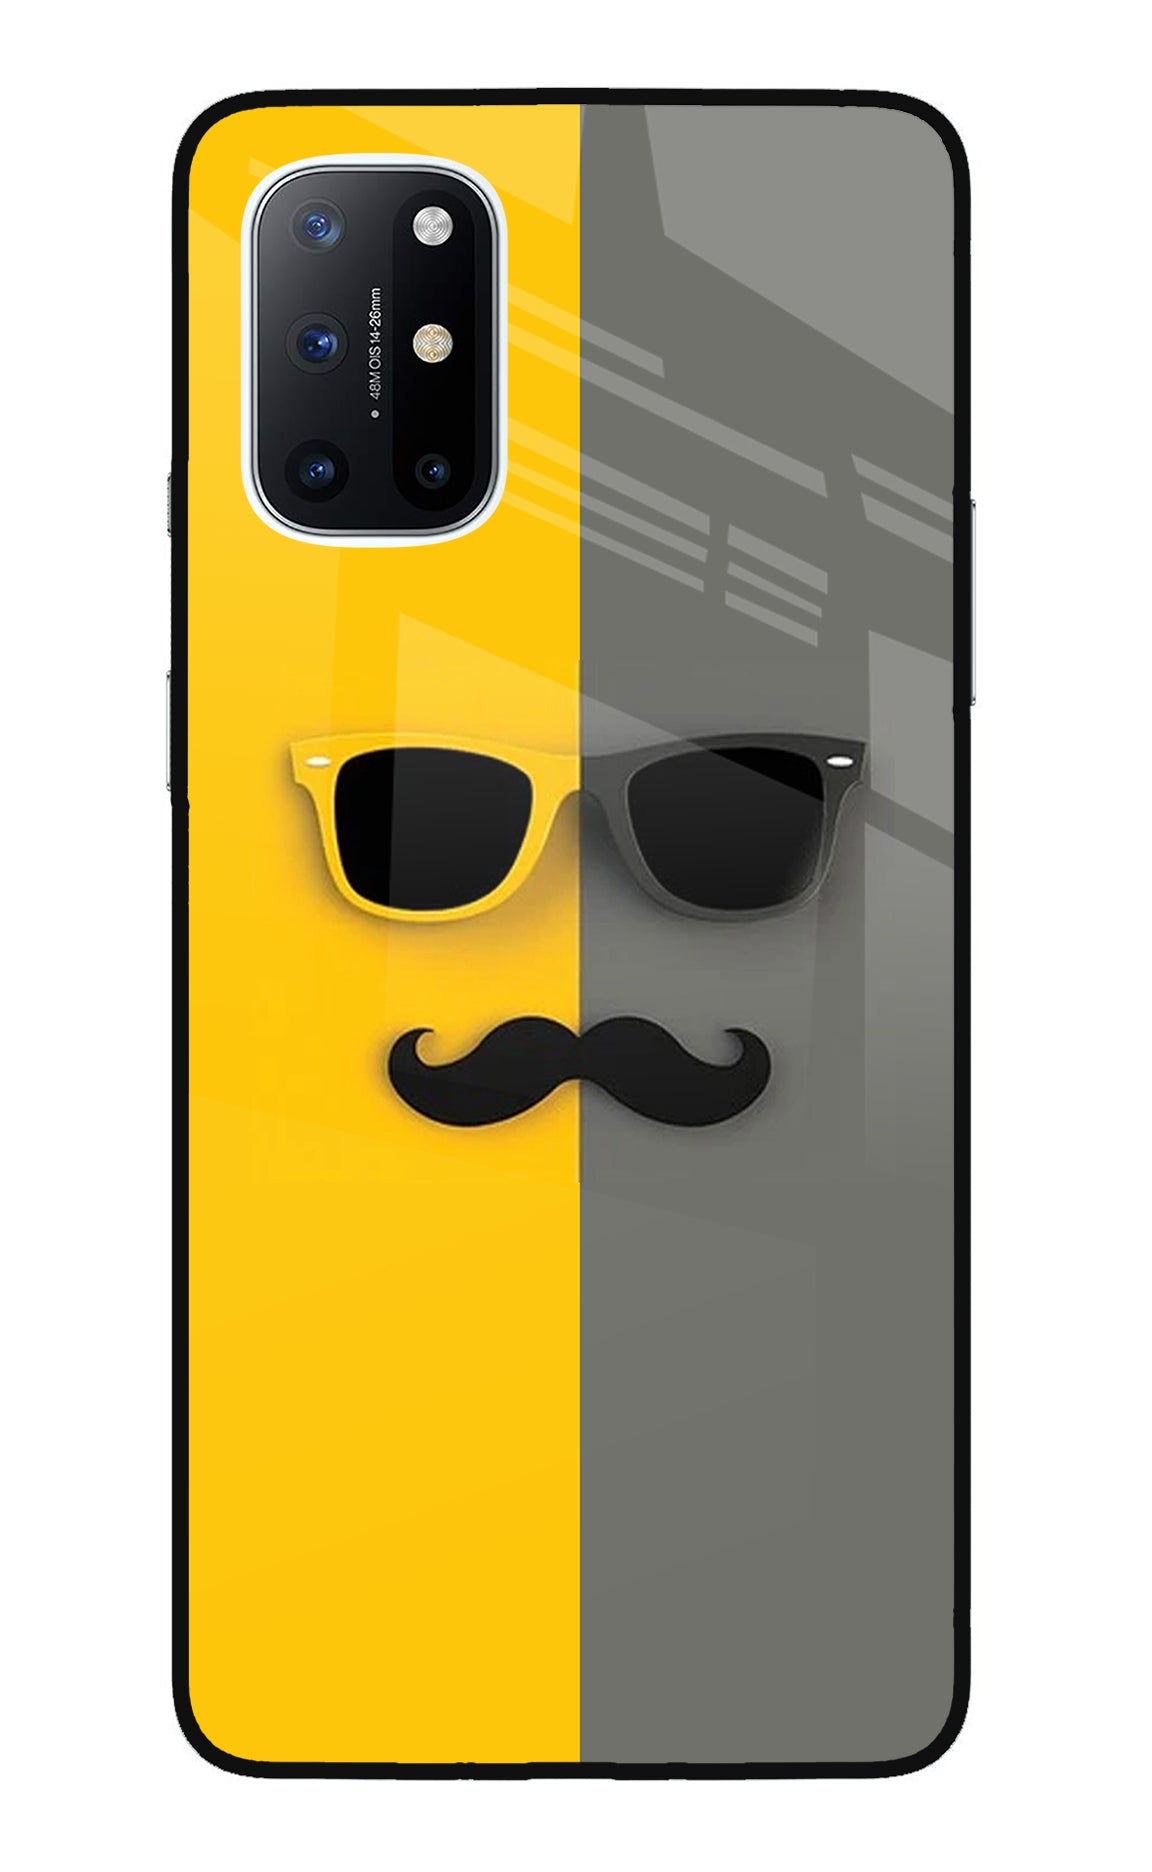 Sunglasses with Mustache Oneplus 8T Back Cover